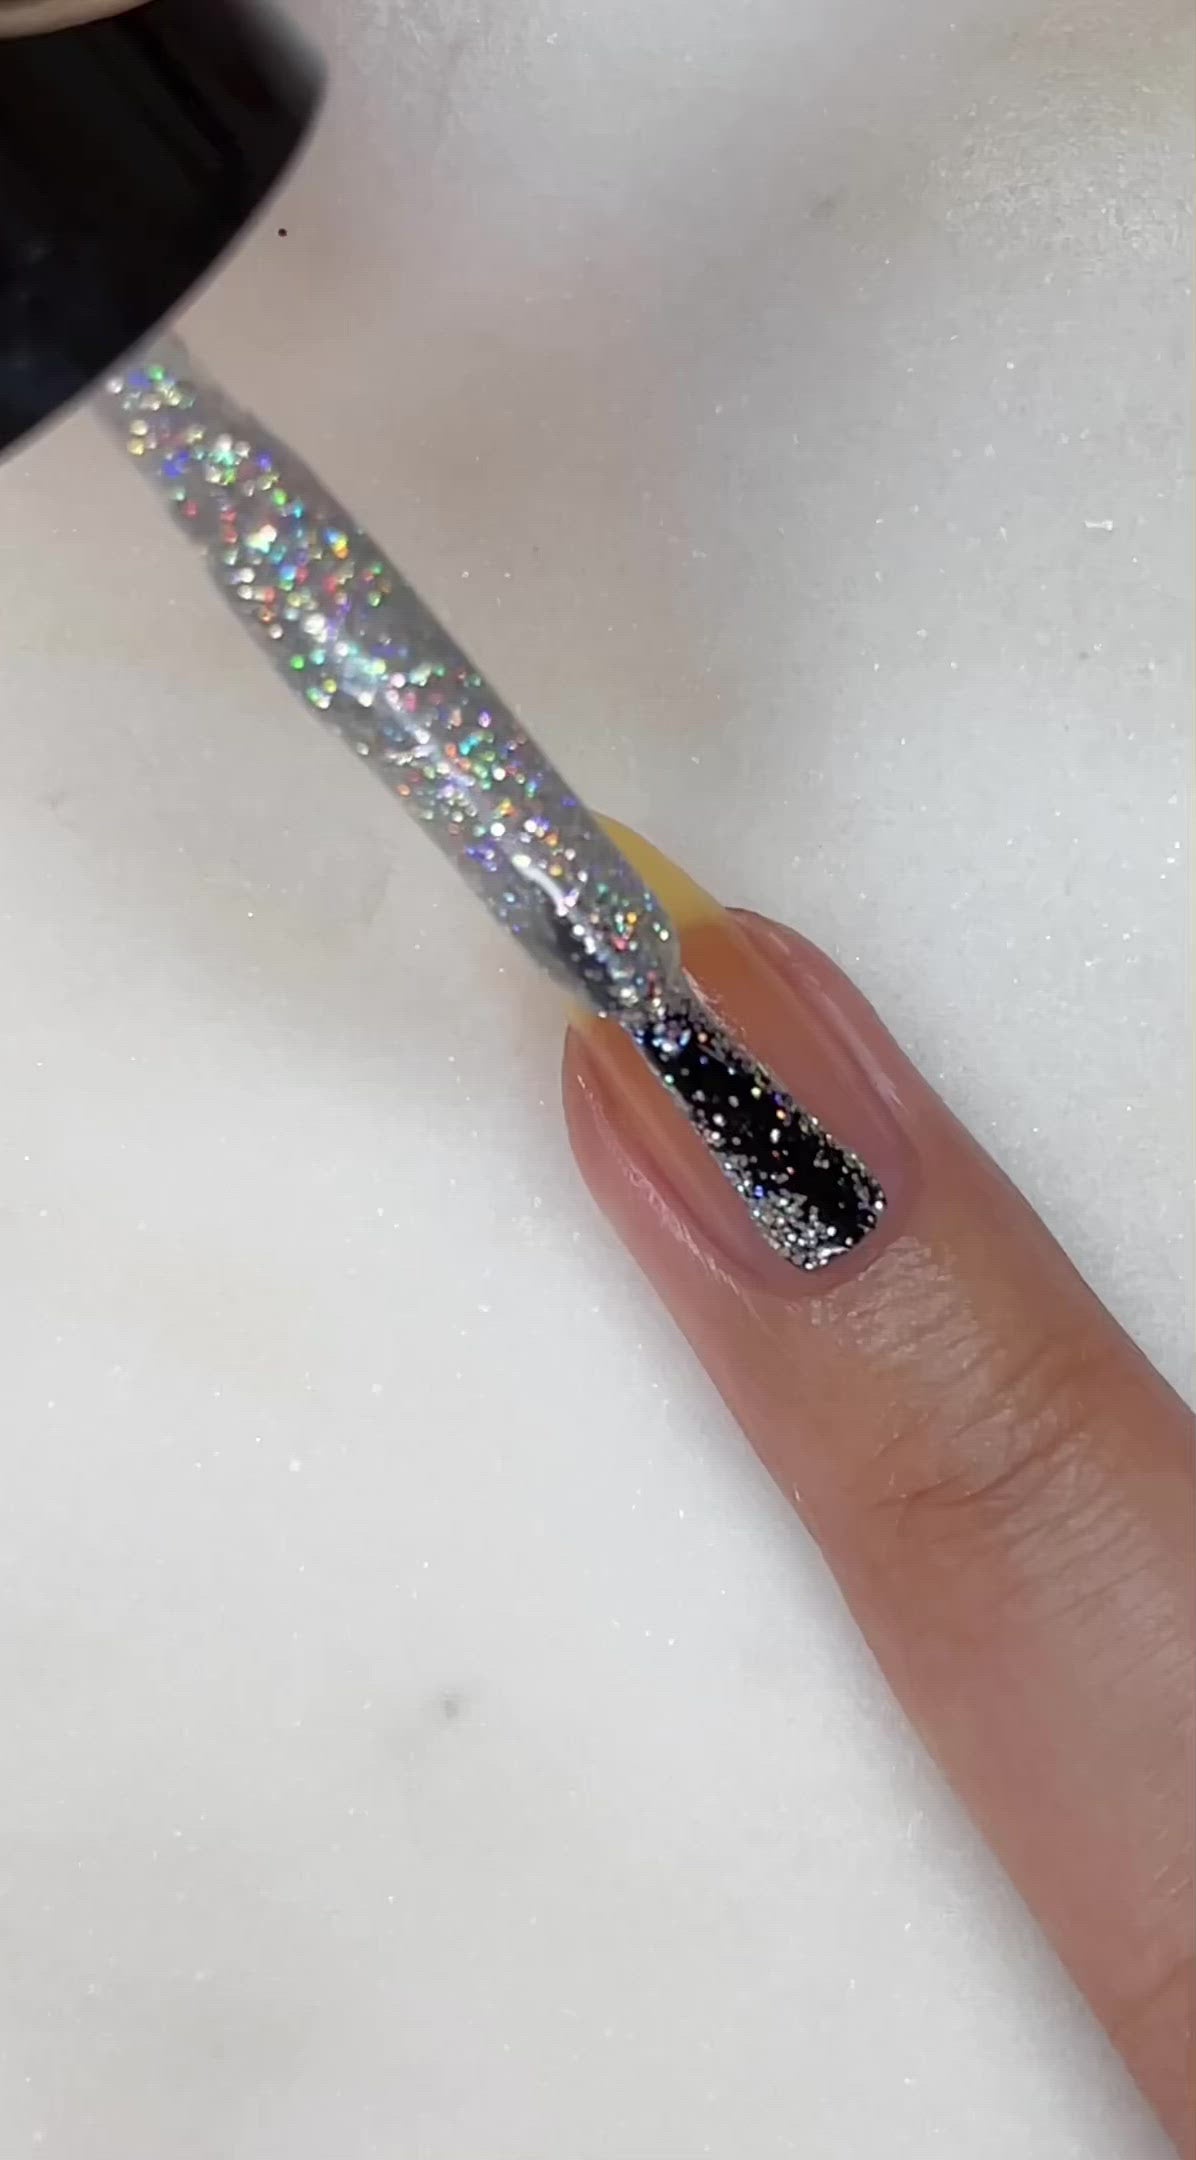 video of fair skin hand model painting nails with nail lacquer showing smooth application and finished product